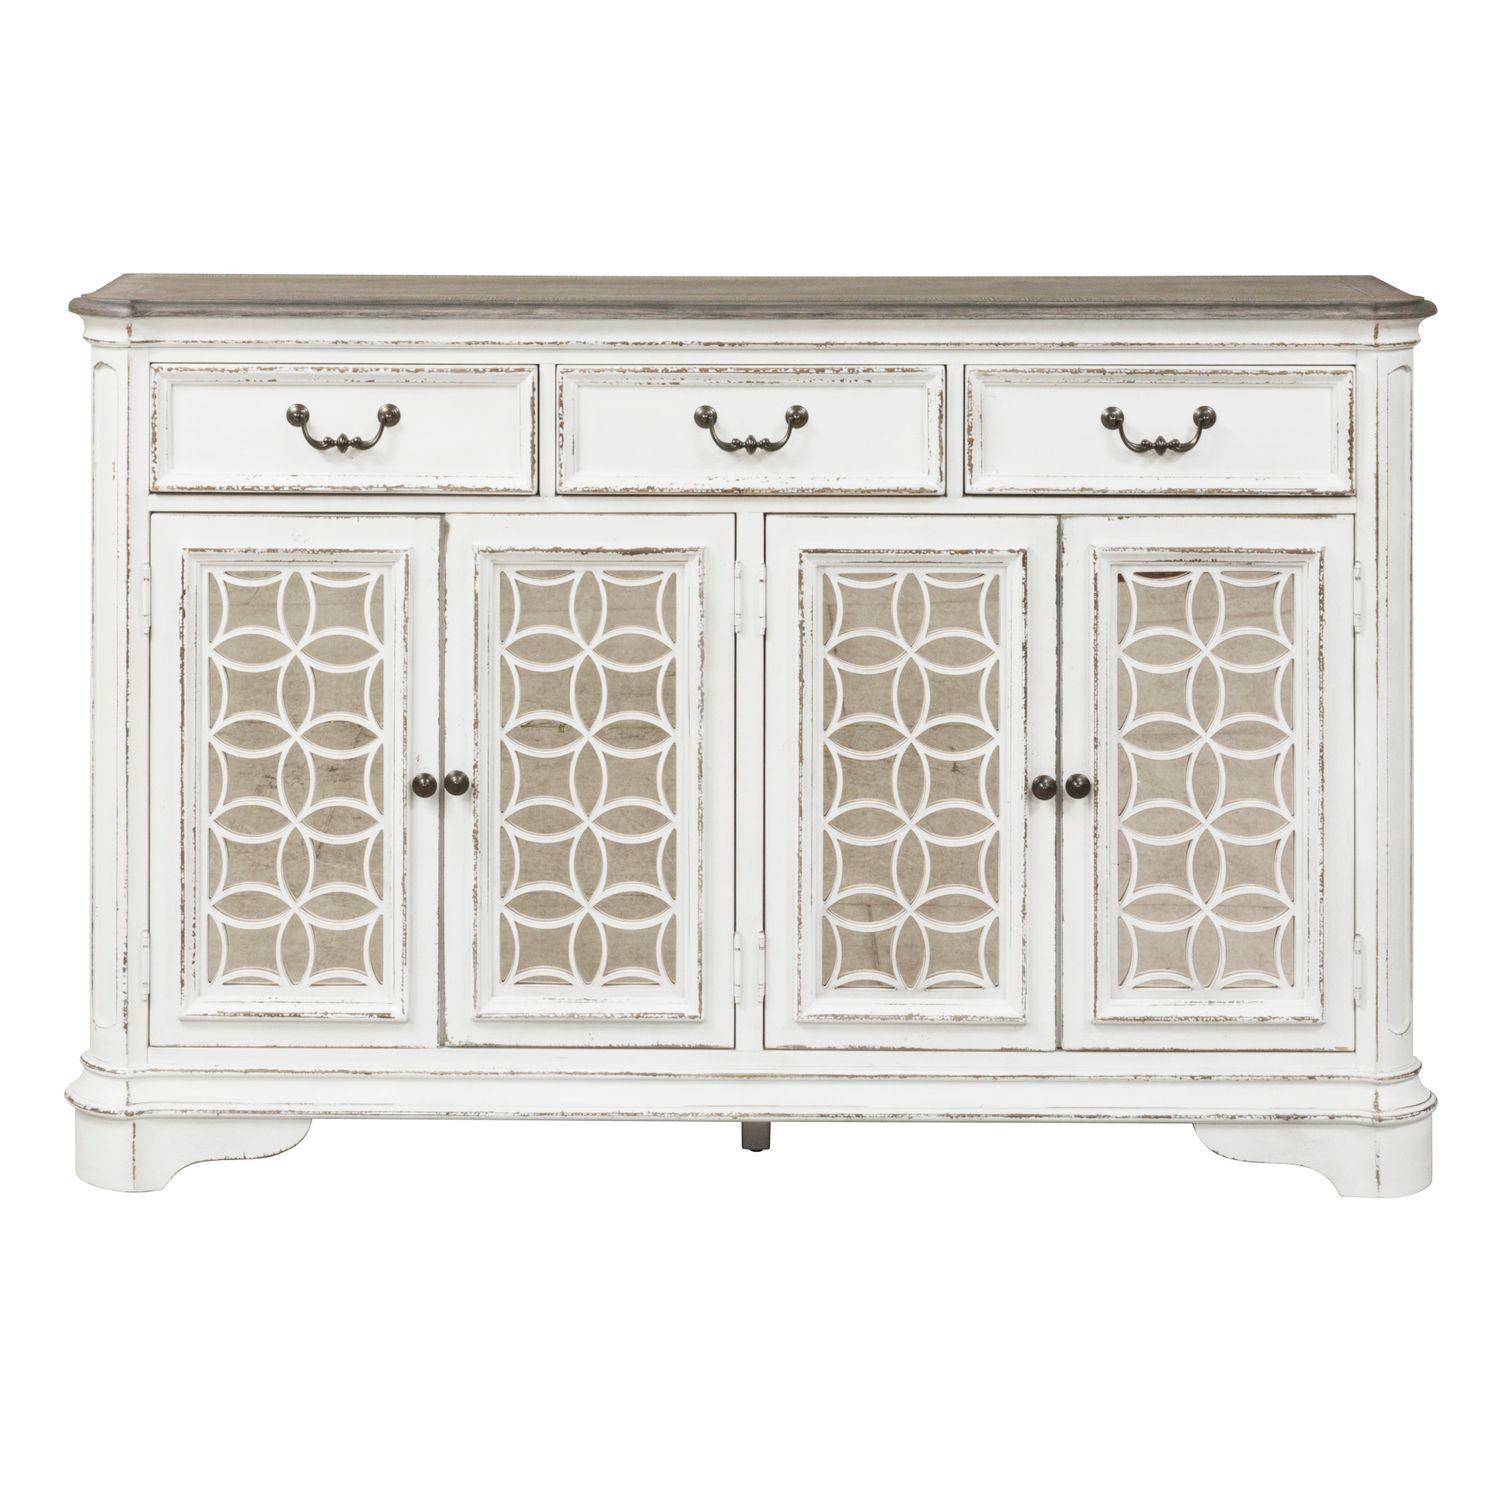 European Traditional Buffet Magnolia Manor  (244-DR) Buffet 244-HB6642 in White 